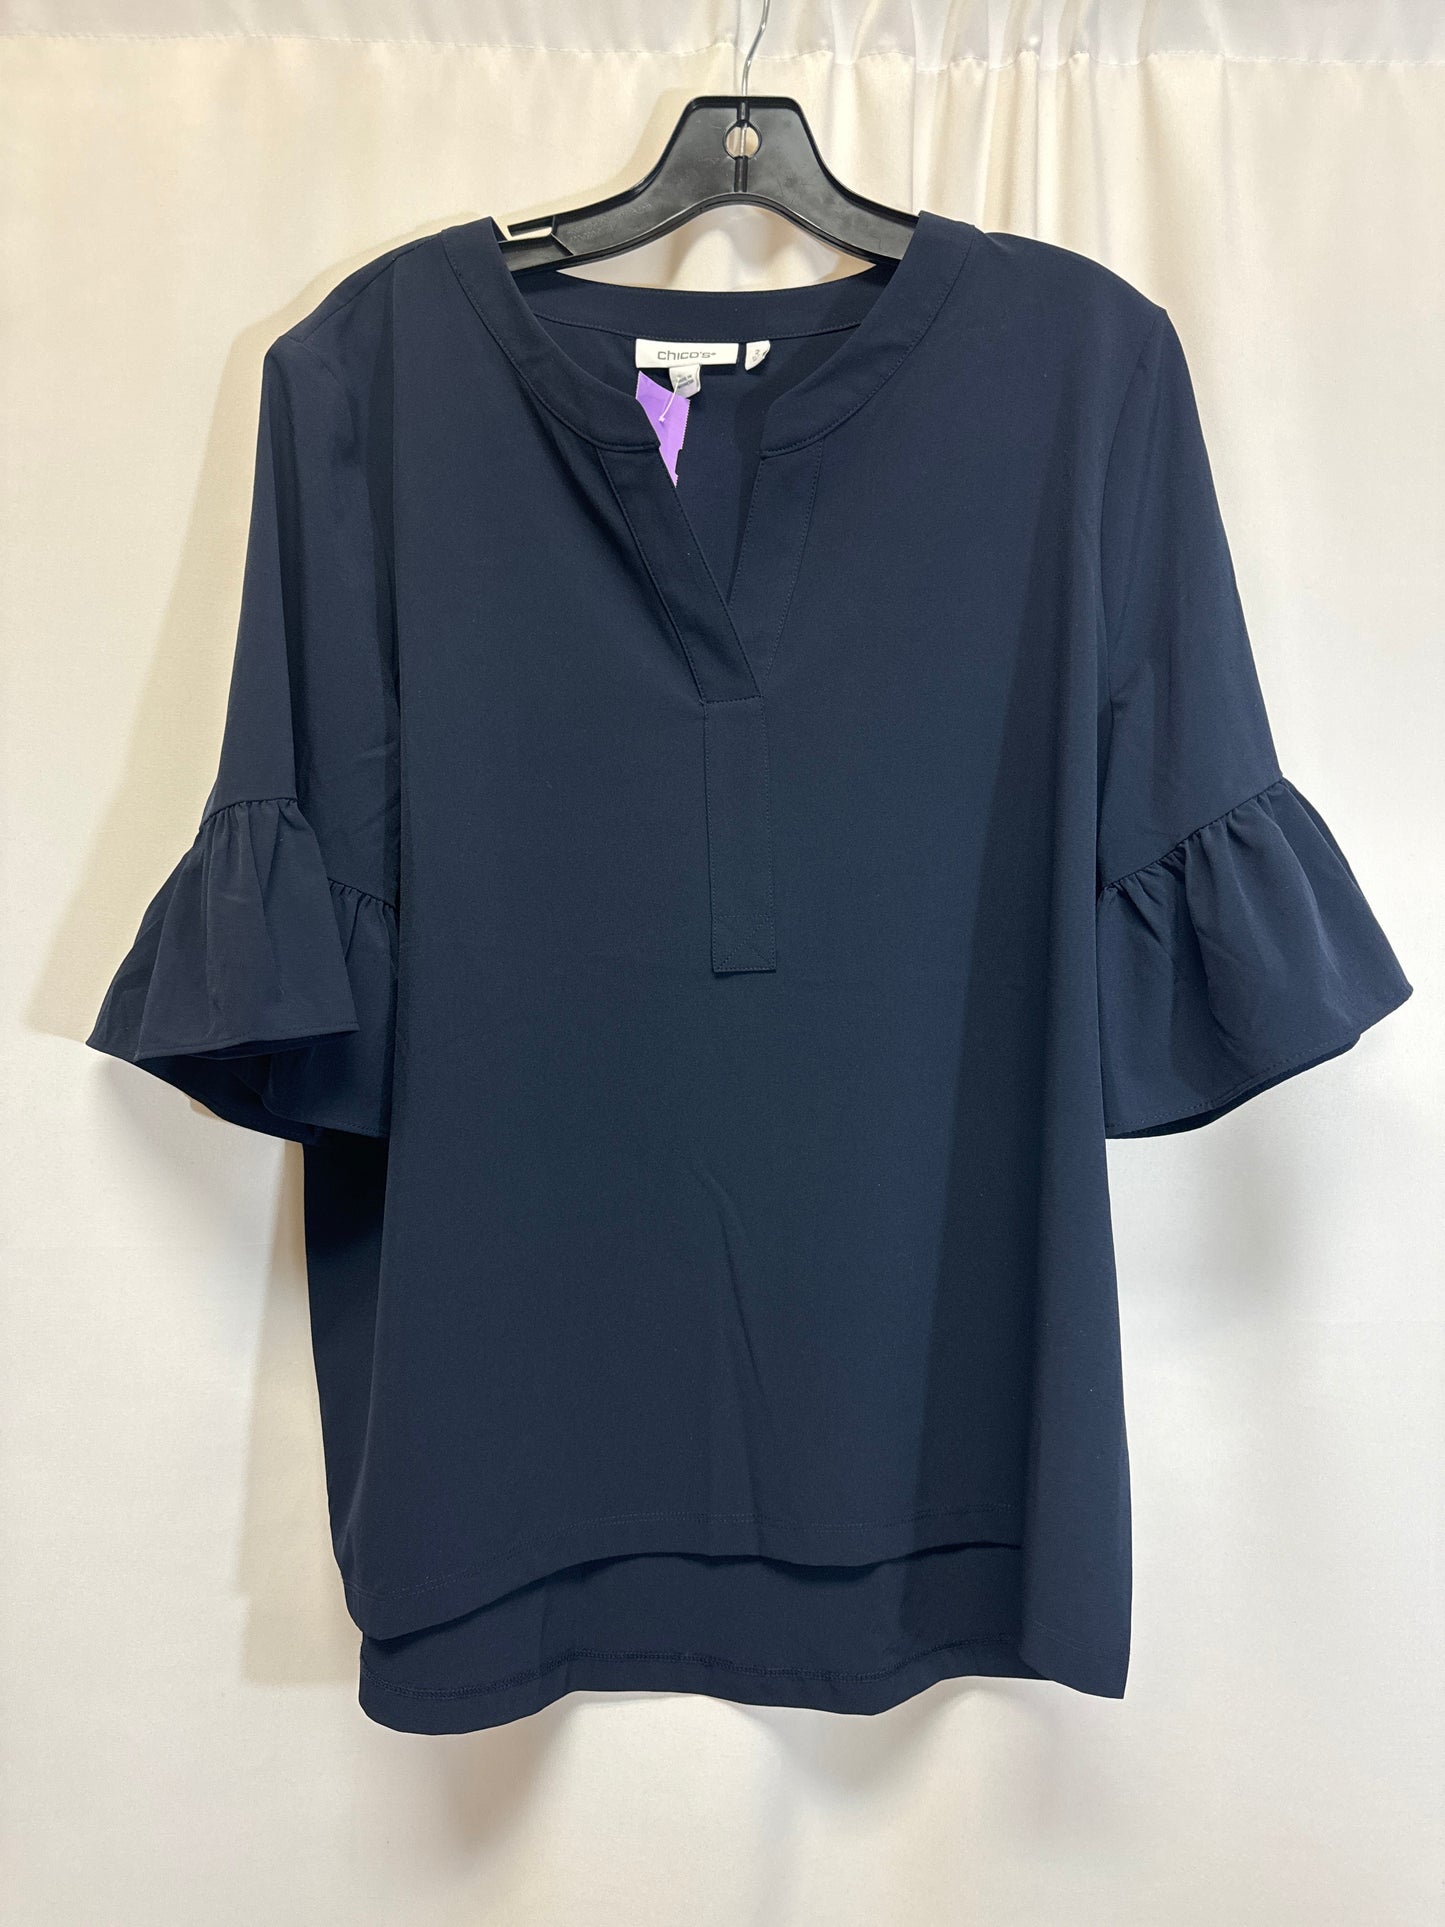 Navy Top Short Sleeve Chicos, Size L